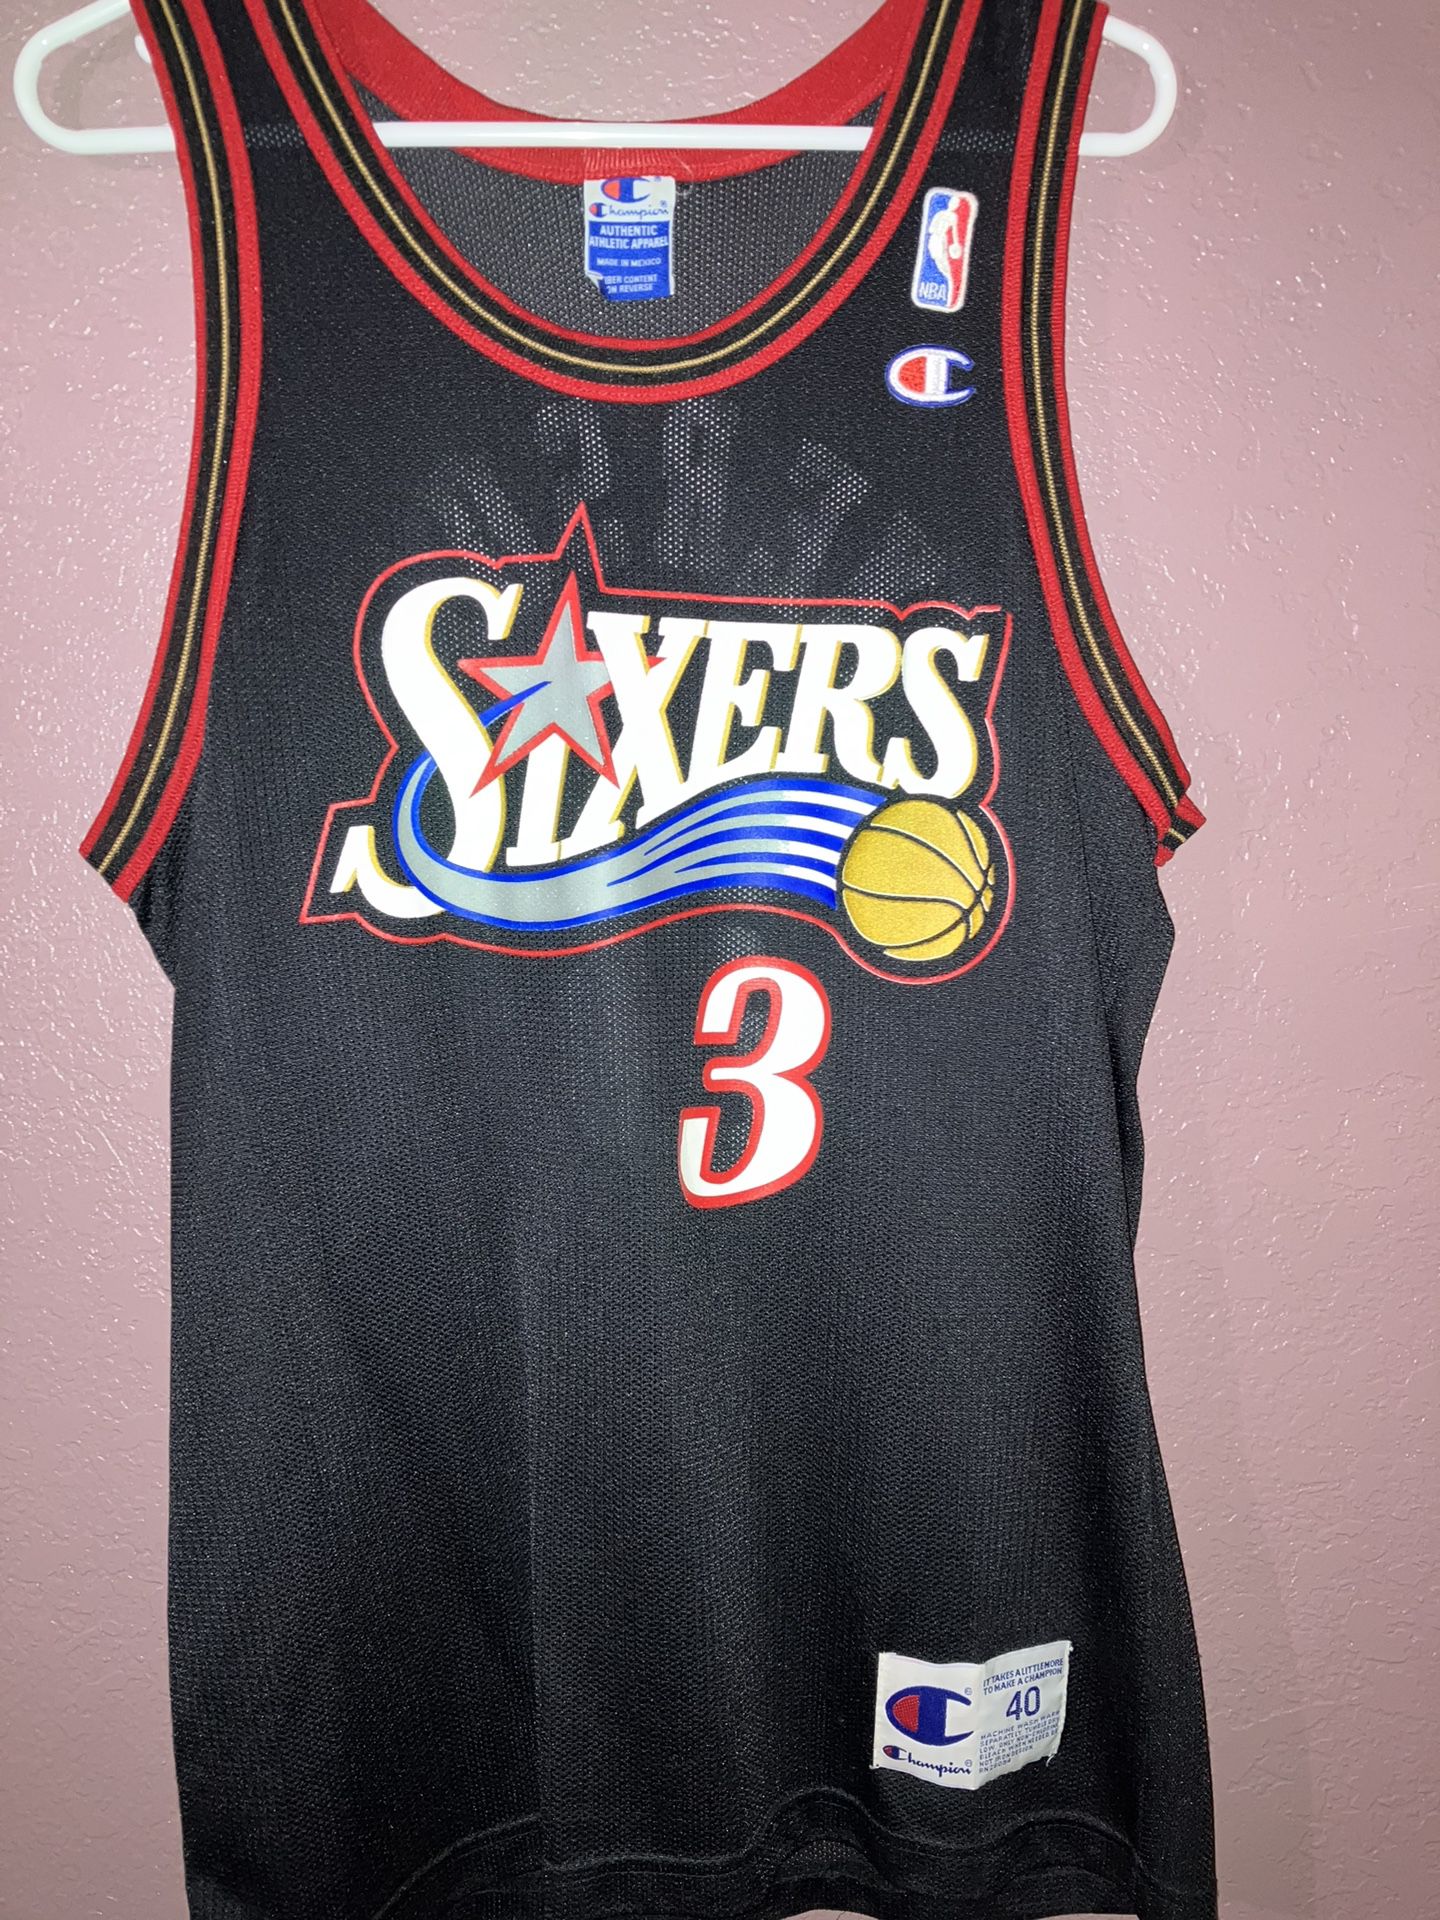 YOUTH KIDS NBA JERSEYS VINTAGE NEW SIZE YOUTH SMALL SCHOOL CLOTHES for Sale  in Dallas, TX - OfferUp